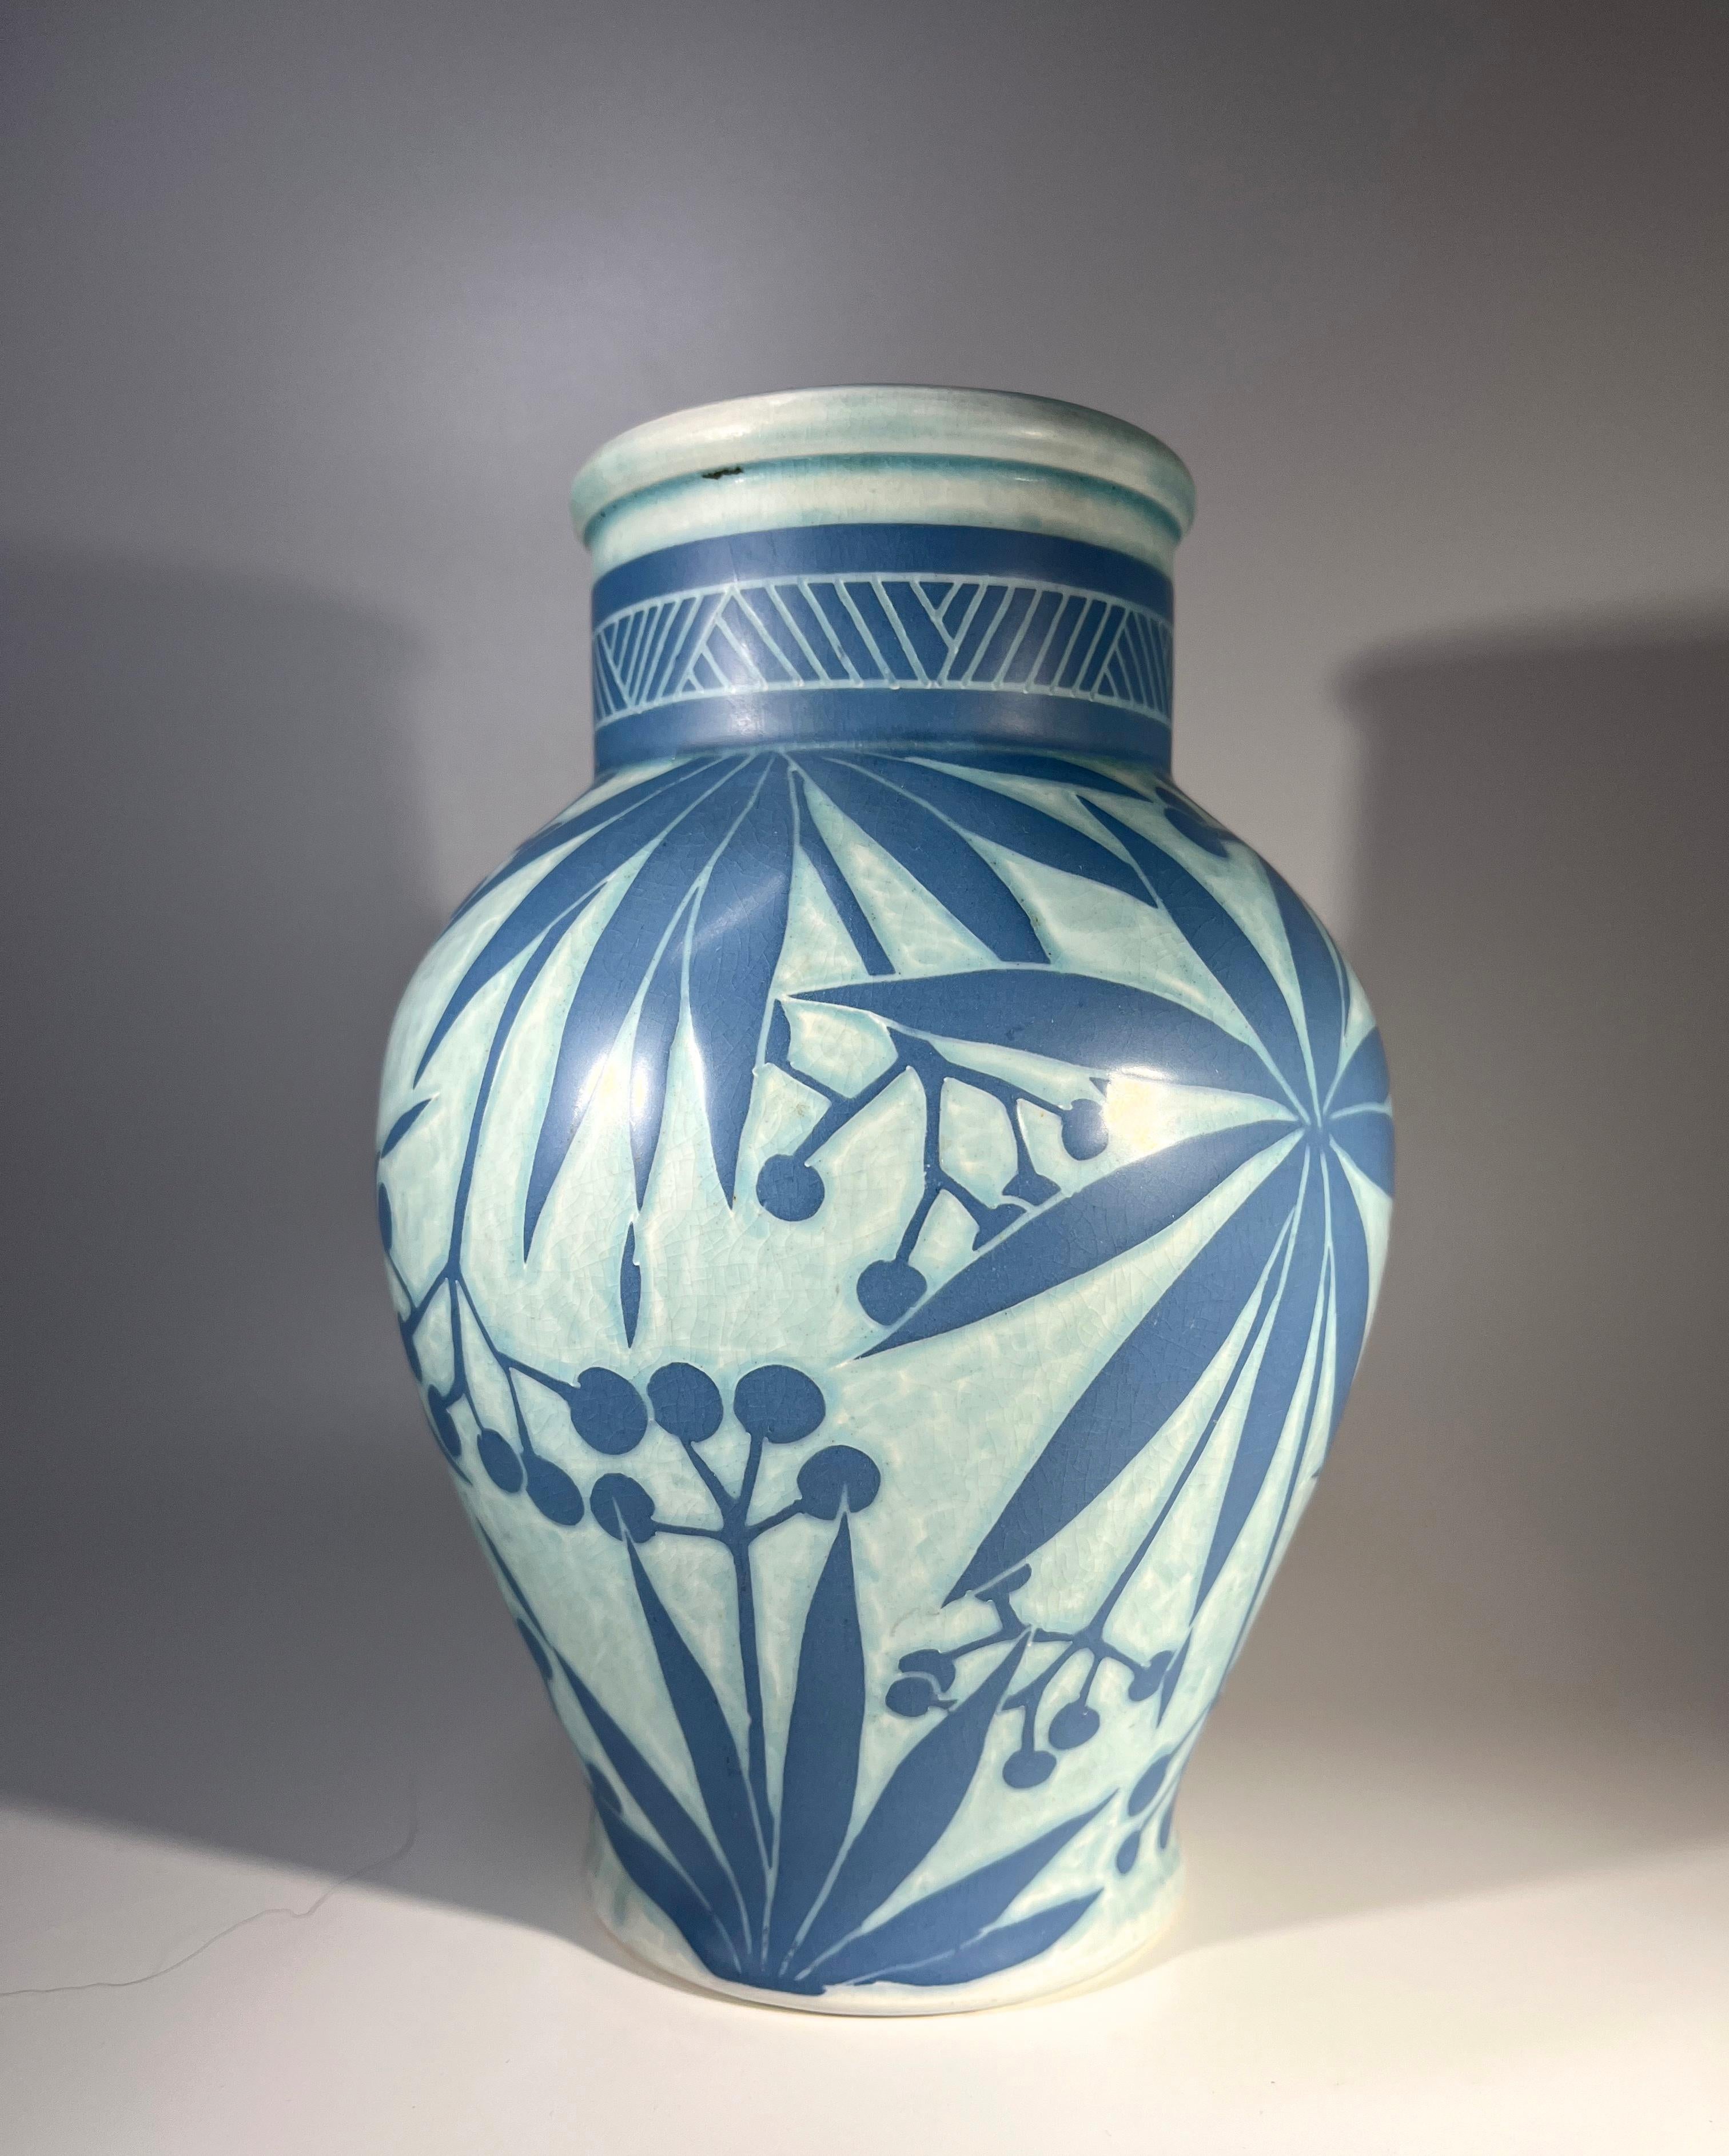 Striking Art Deco sgraffito ceramic vase by Josef Ekberg for Gustavsberg. 
Layers consist of pale blue ground and mid blue palm leaf decoration
Signed Ekberg and dated 1911 
Height 8 inch, Width 5.5 inch
A unique example of Ekberg's craftsmanship
In